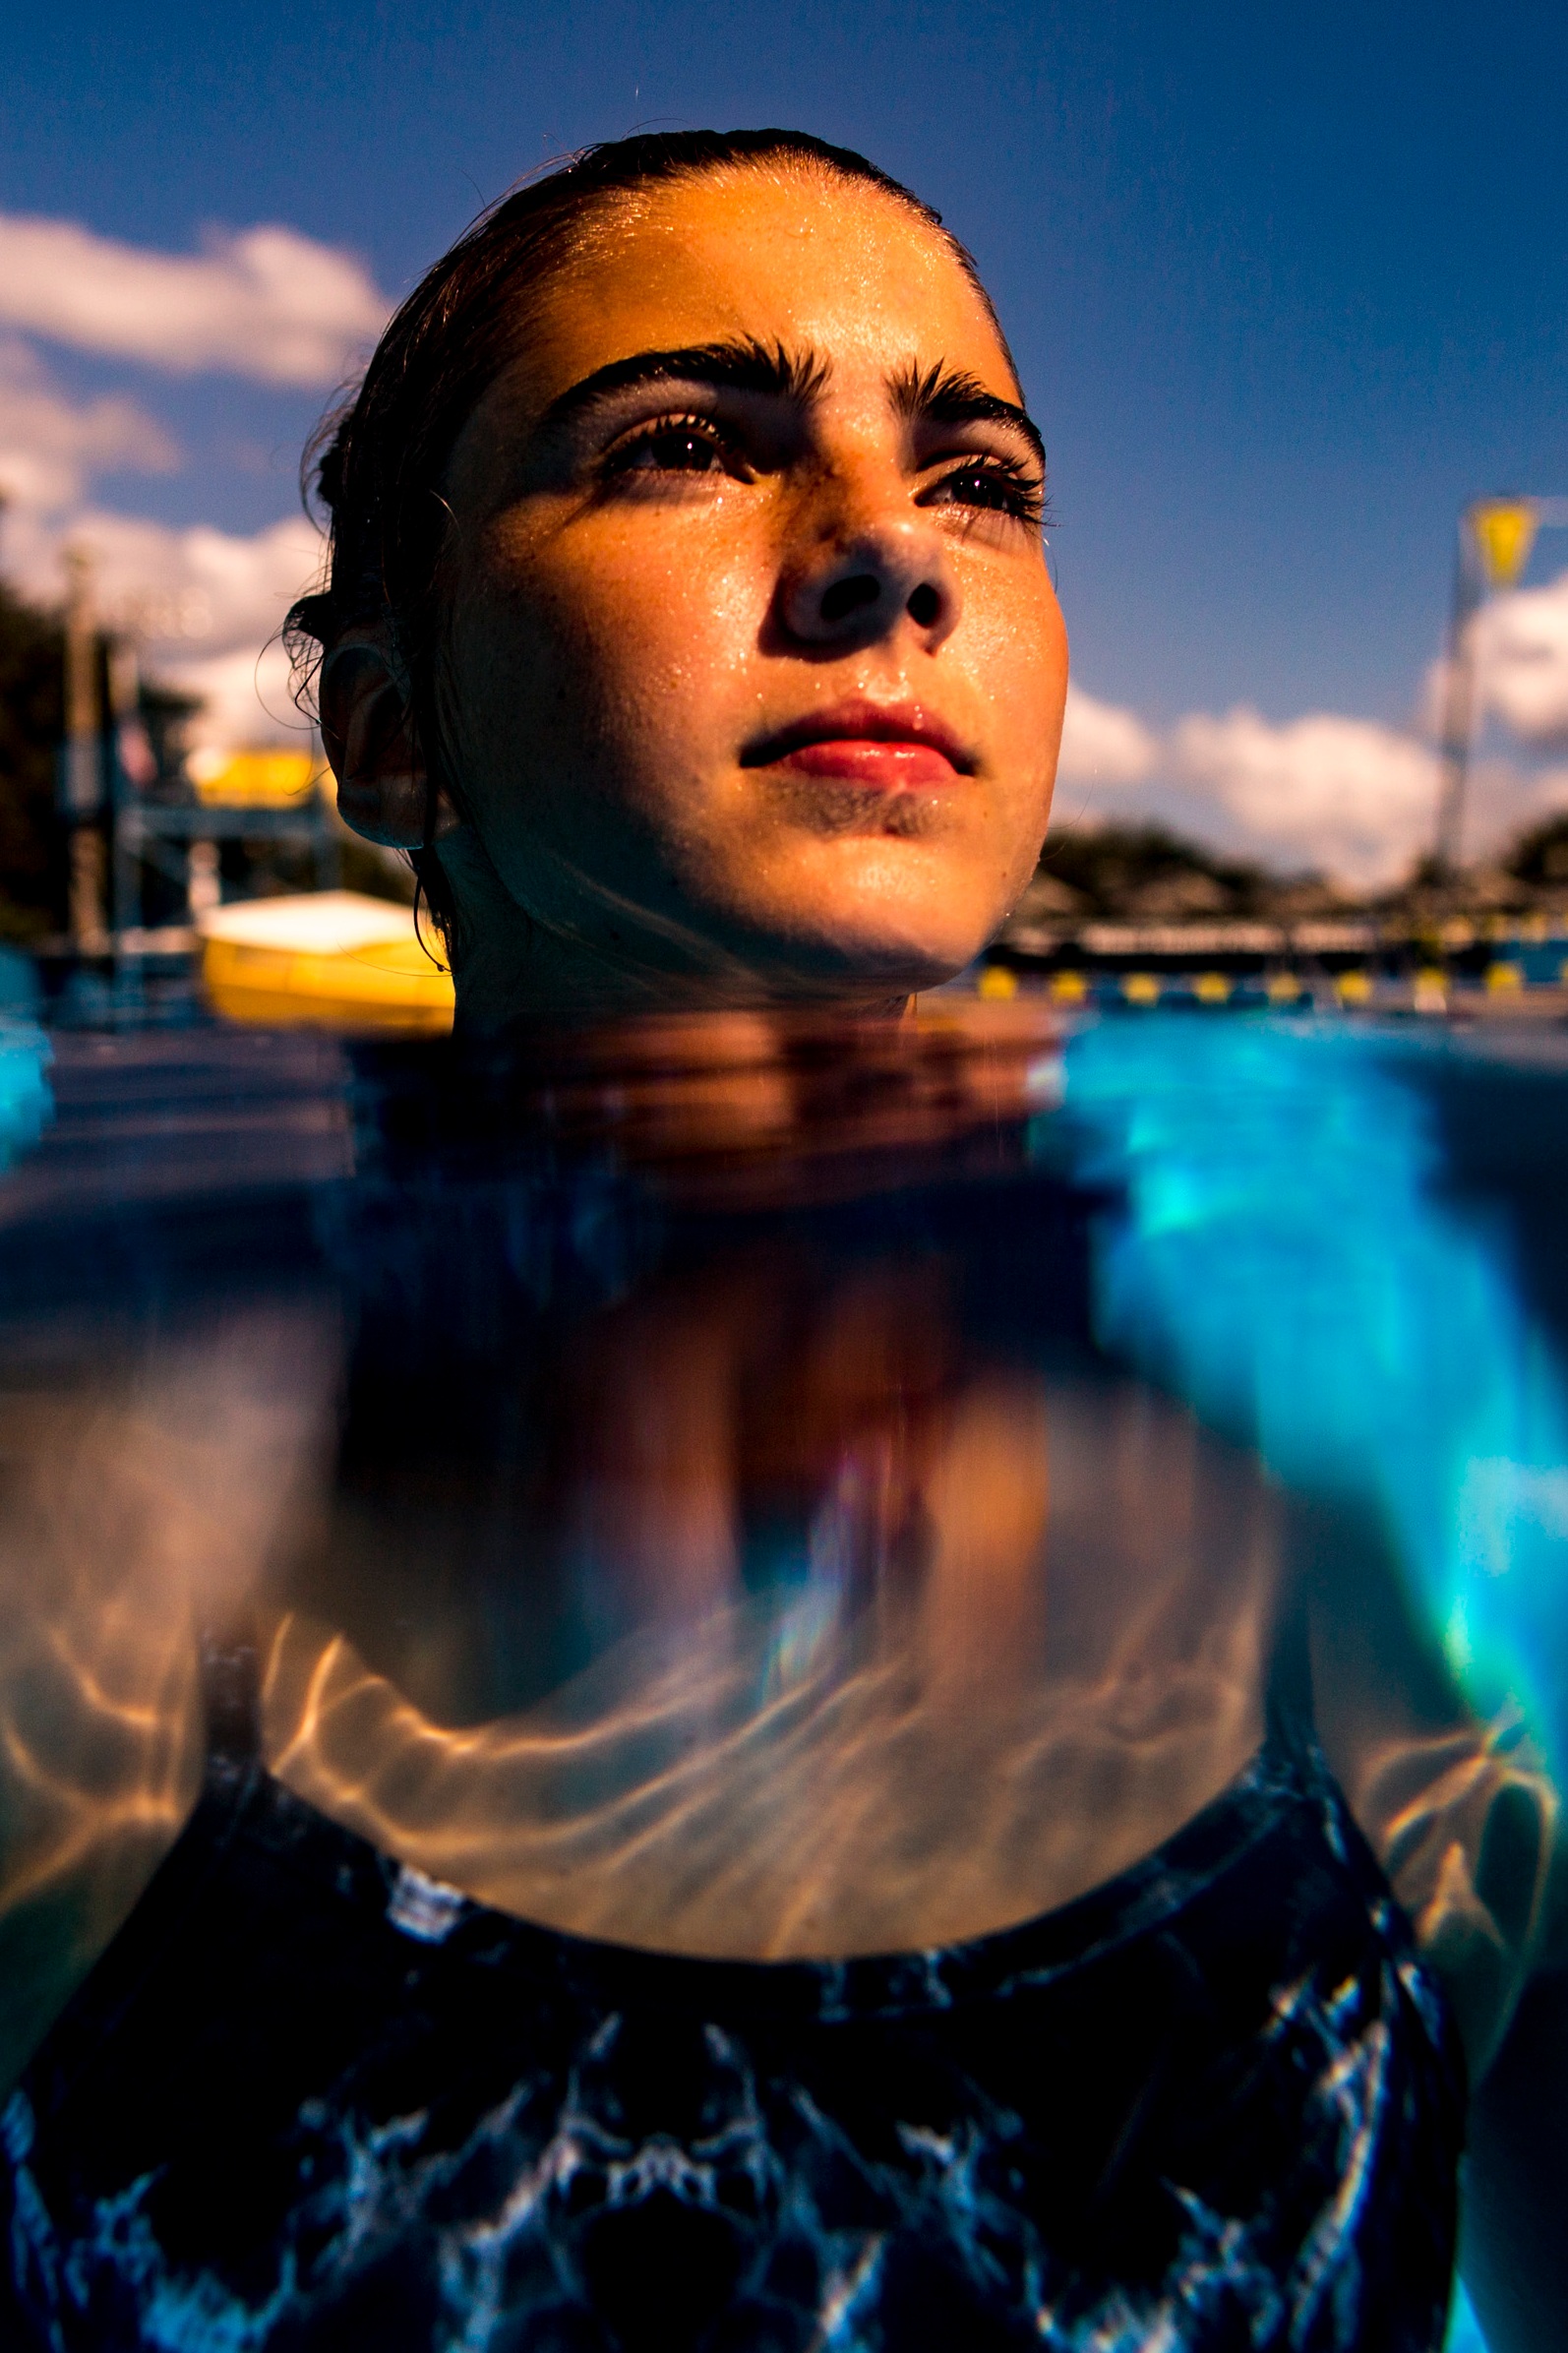  Buchholz High diver Sara Warm poses for a portrait at the Dwight H Hunter "Northeast" Pool on October 4, 2018.  